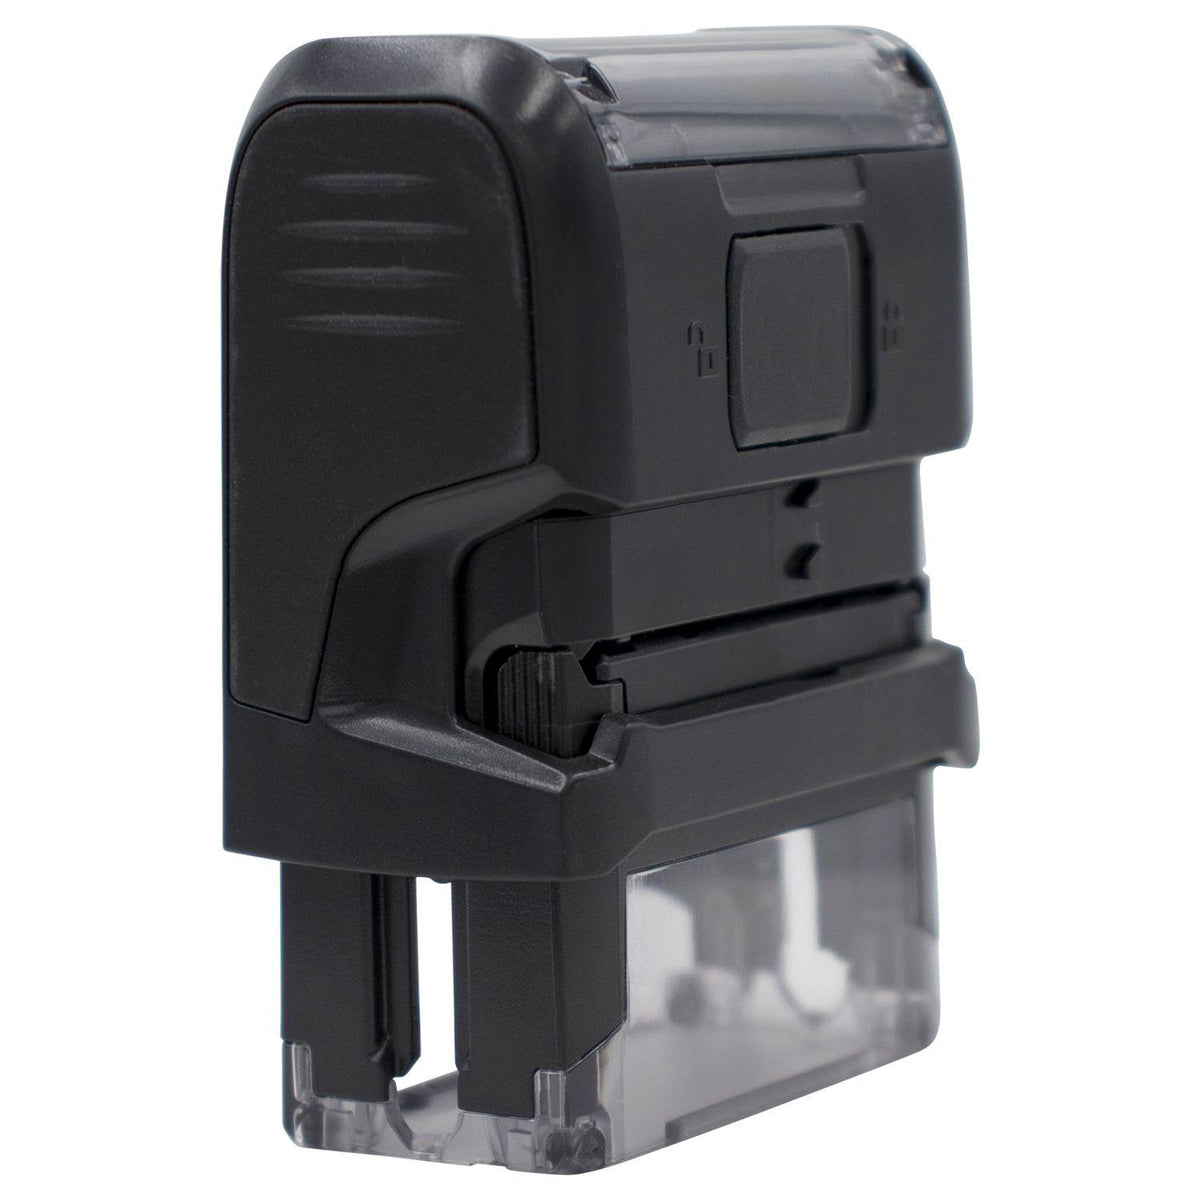 Self Inking Show All Of Your Work Stamp - Engineer Seal Stamps - Brand_Trodat, Impression Size_Small, Stamp Type_Self-Inking Stamp, Type of Use_Teacher